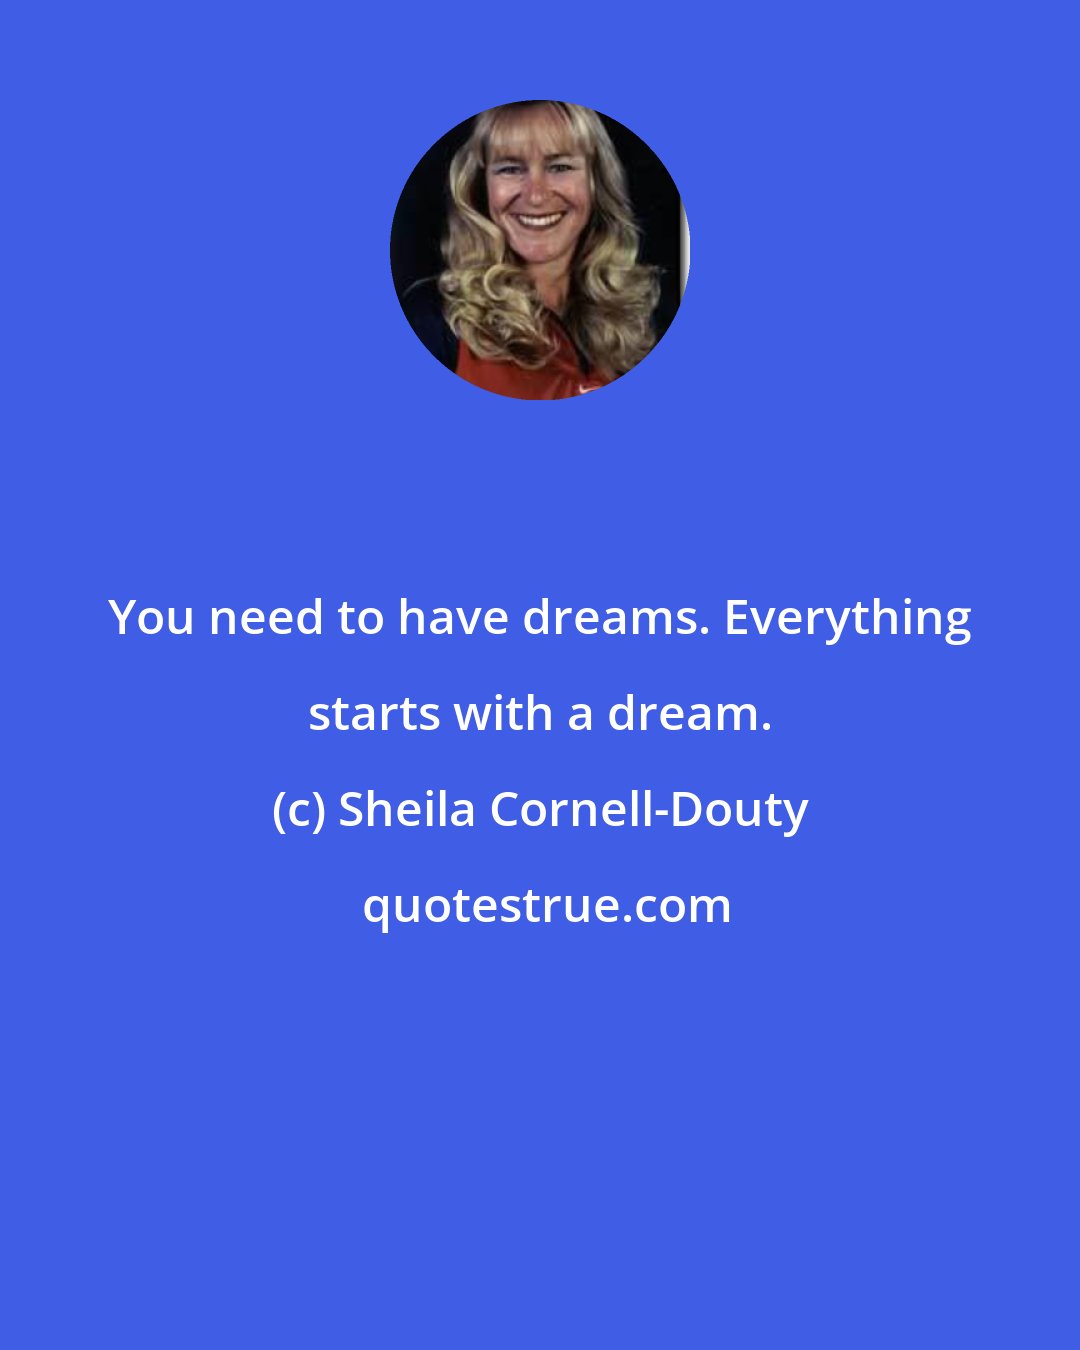 Sheila Cornell-Douty: You need to have dreams. Everything starts with a dream.